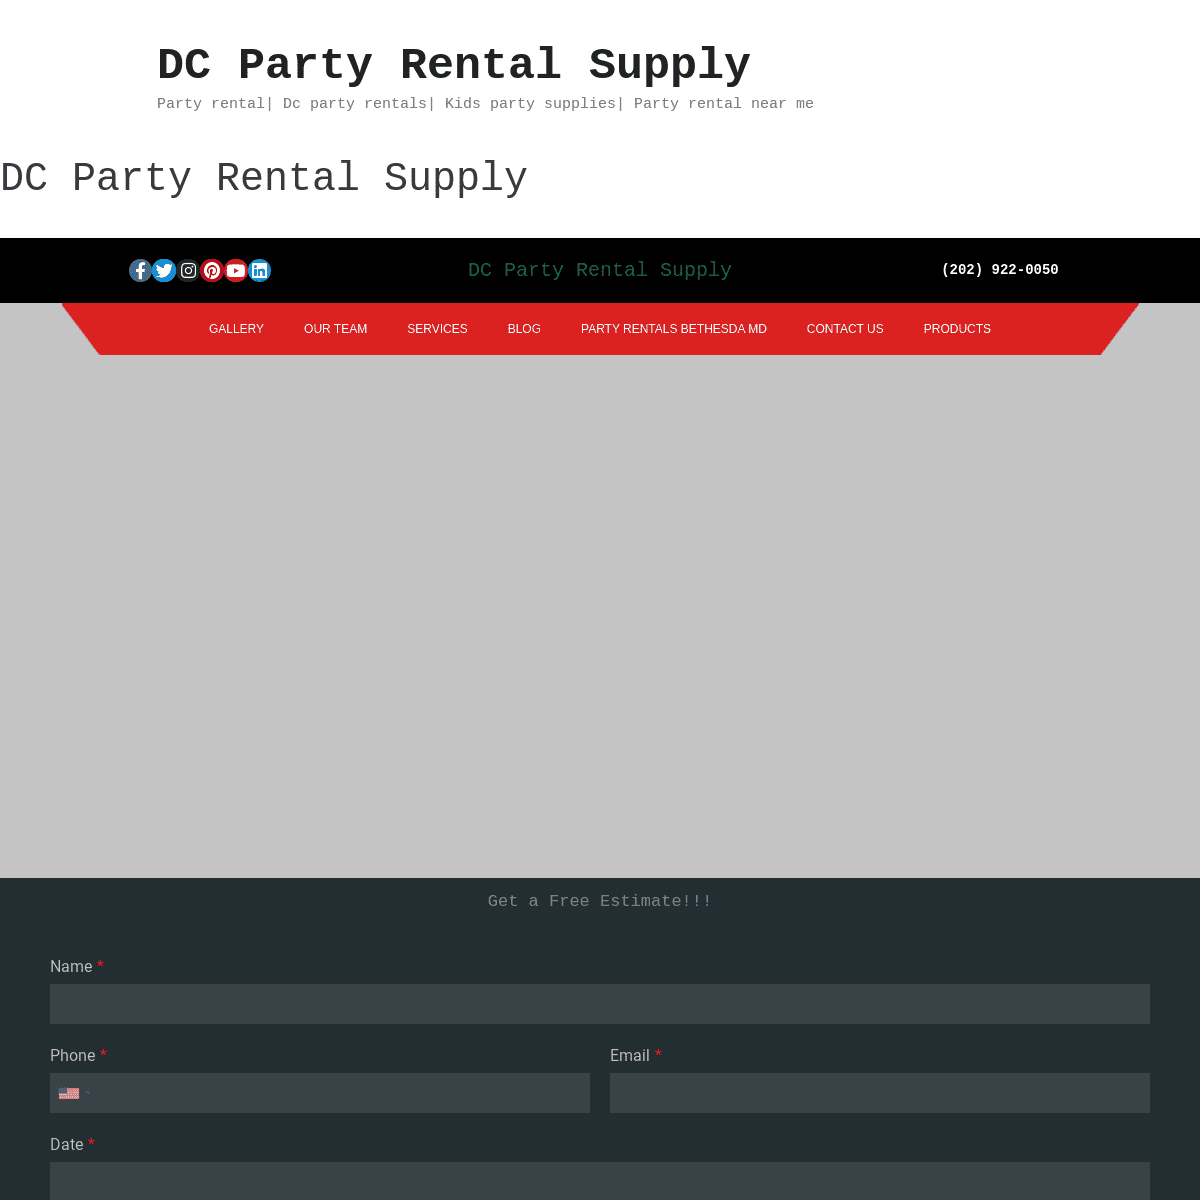 A complete backup of https://dcpartyrentalsupply.com